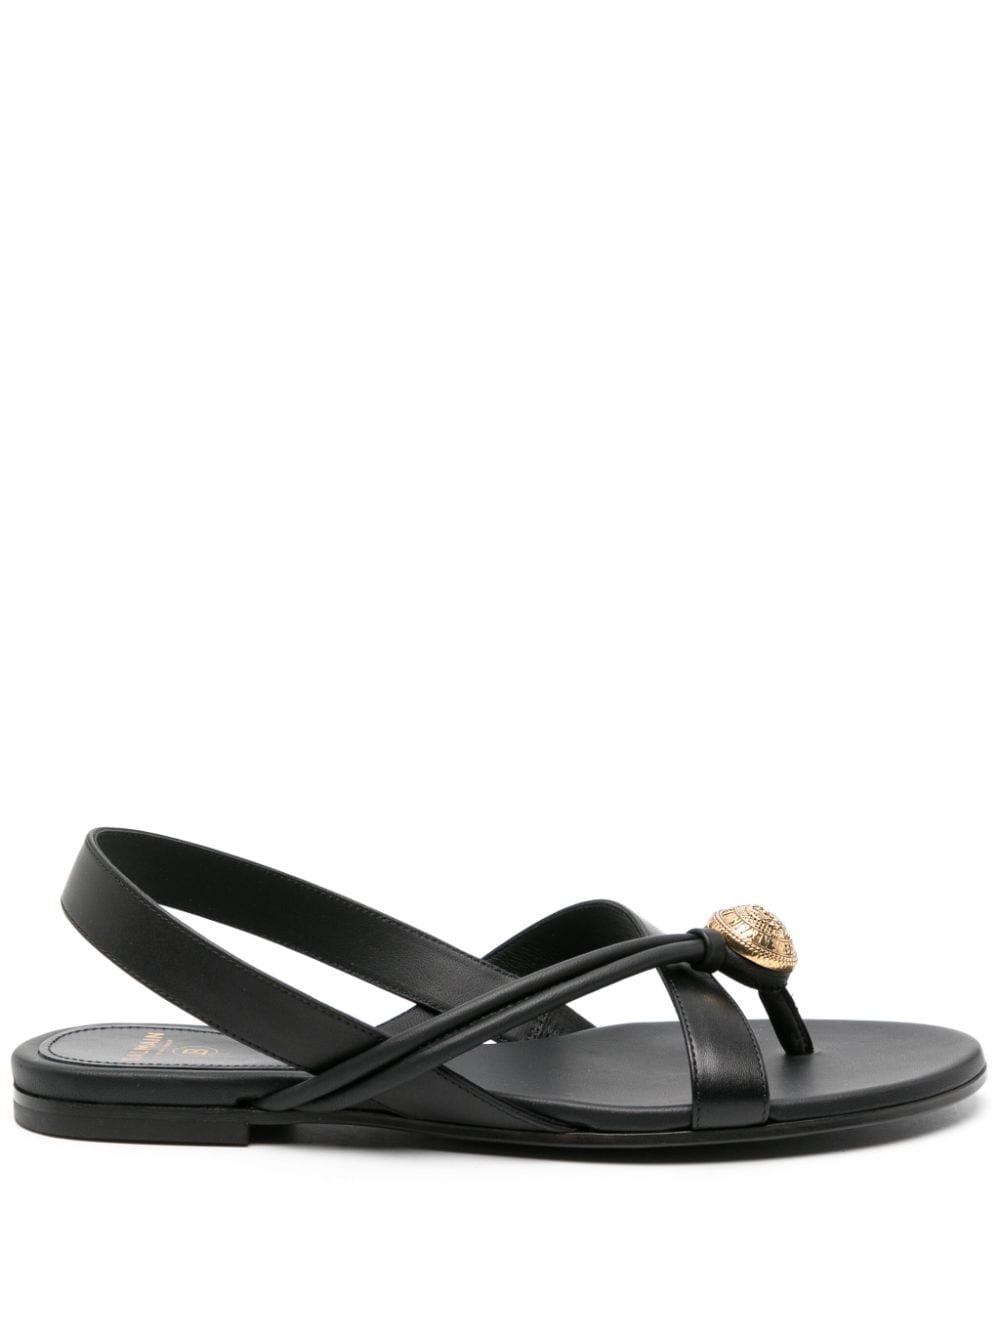 Women's Black Sandals with Gold Detail